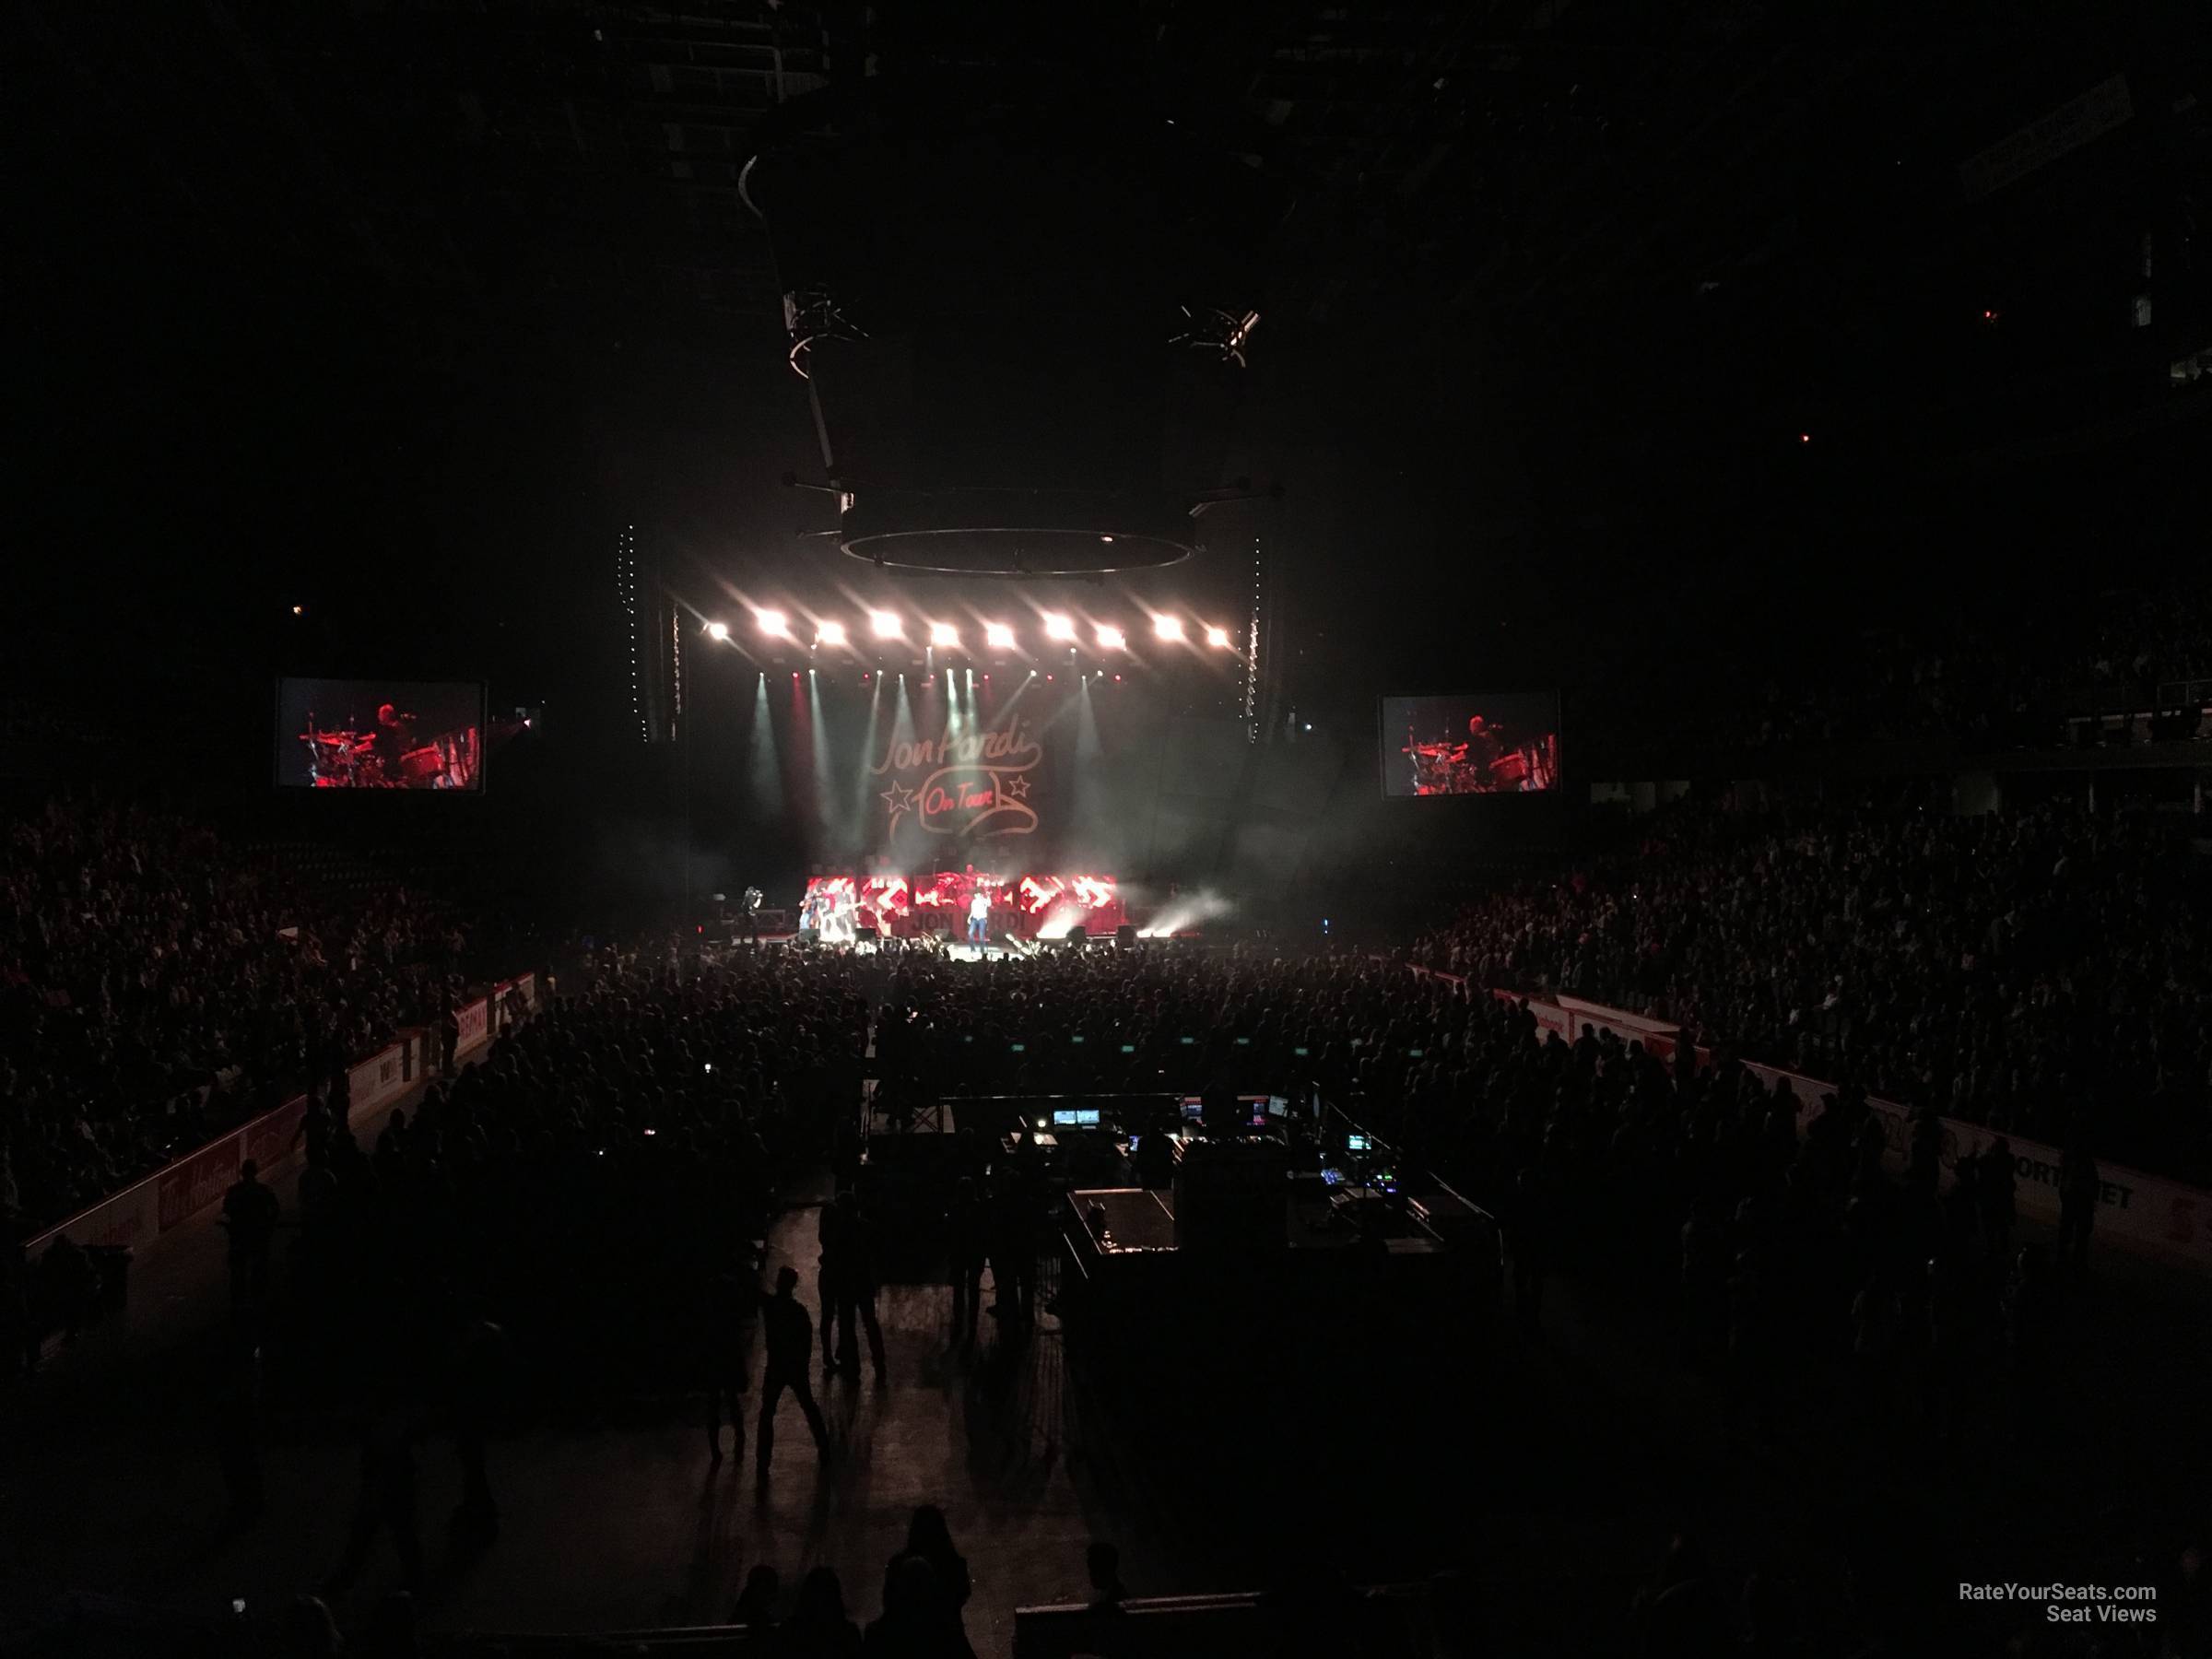 head-on concert view at Scotiabank Saddledome